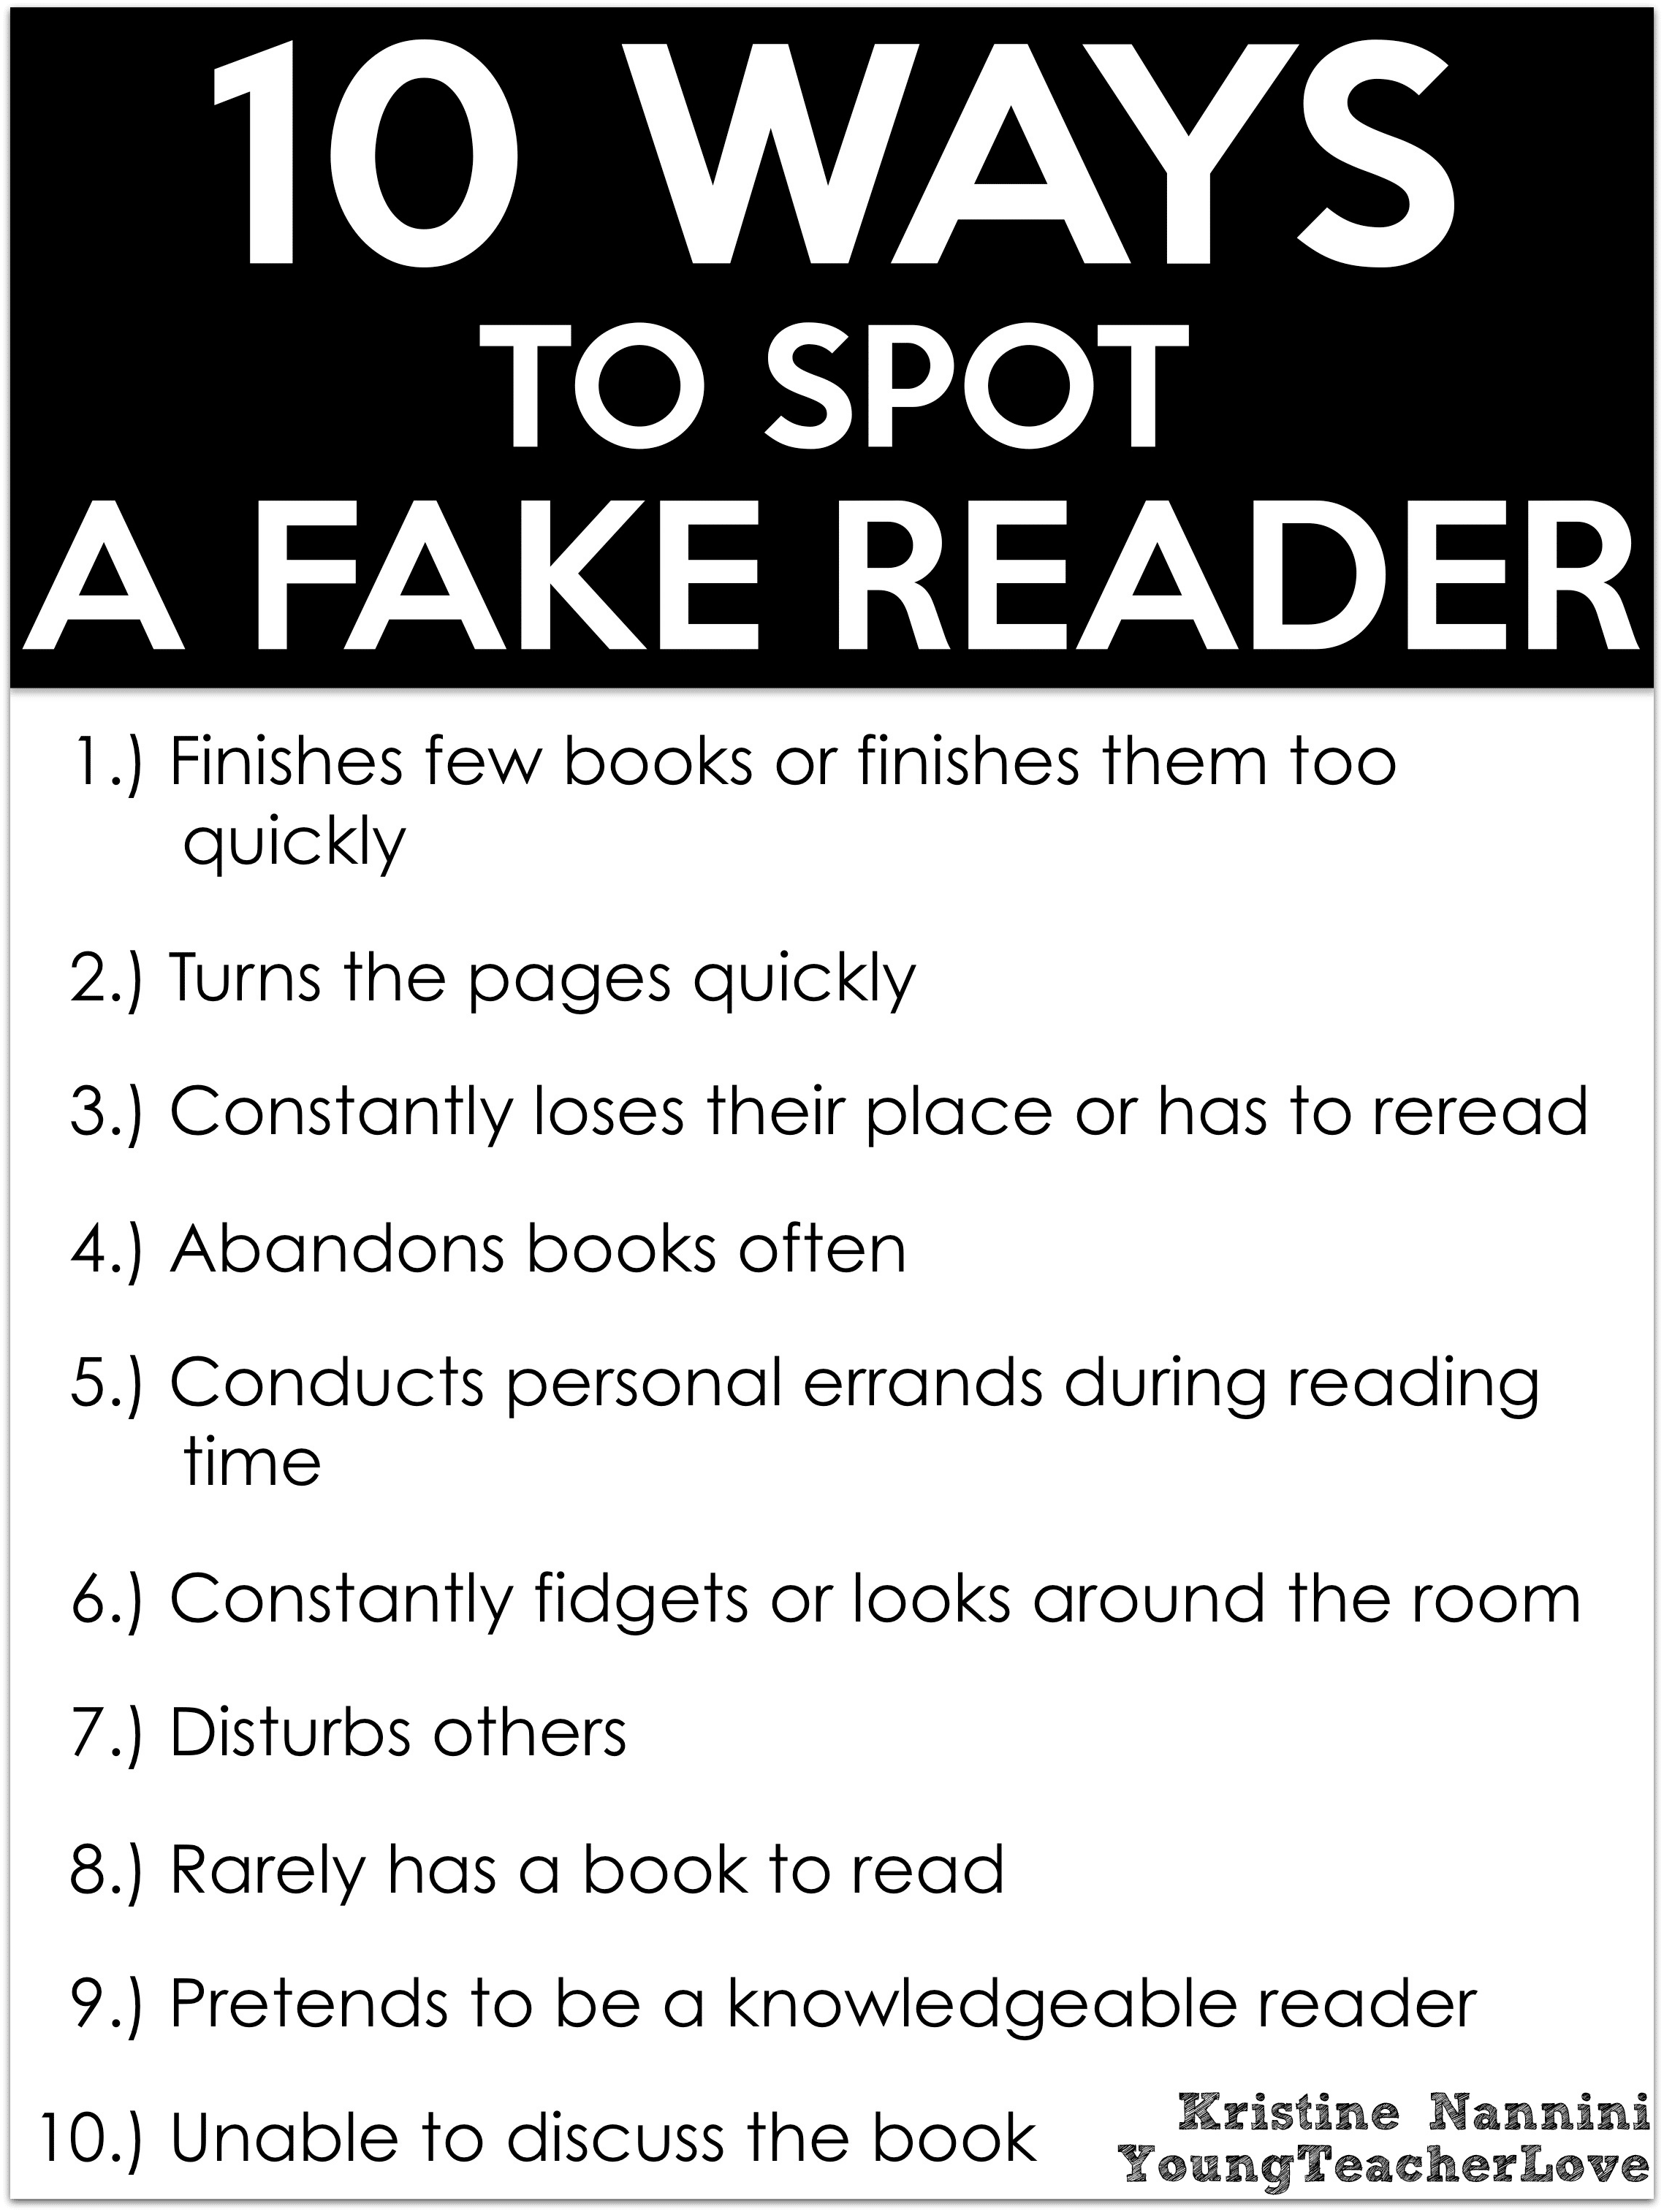 10 Ways to Spot a Fake Reader - Young Teacher Love by Kristine Nannini